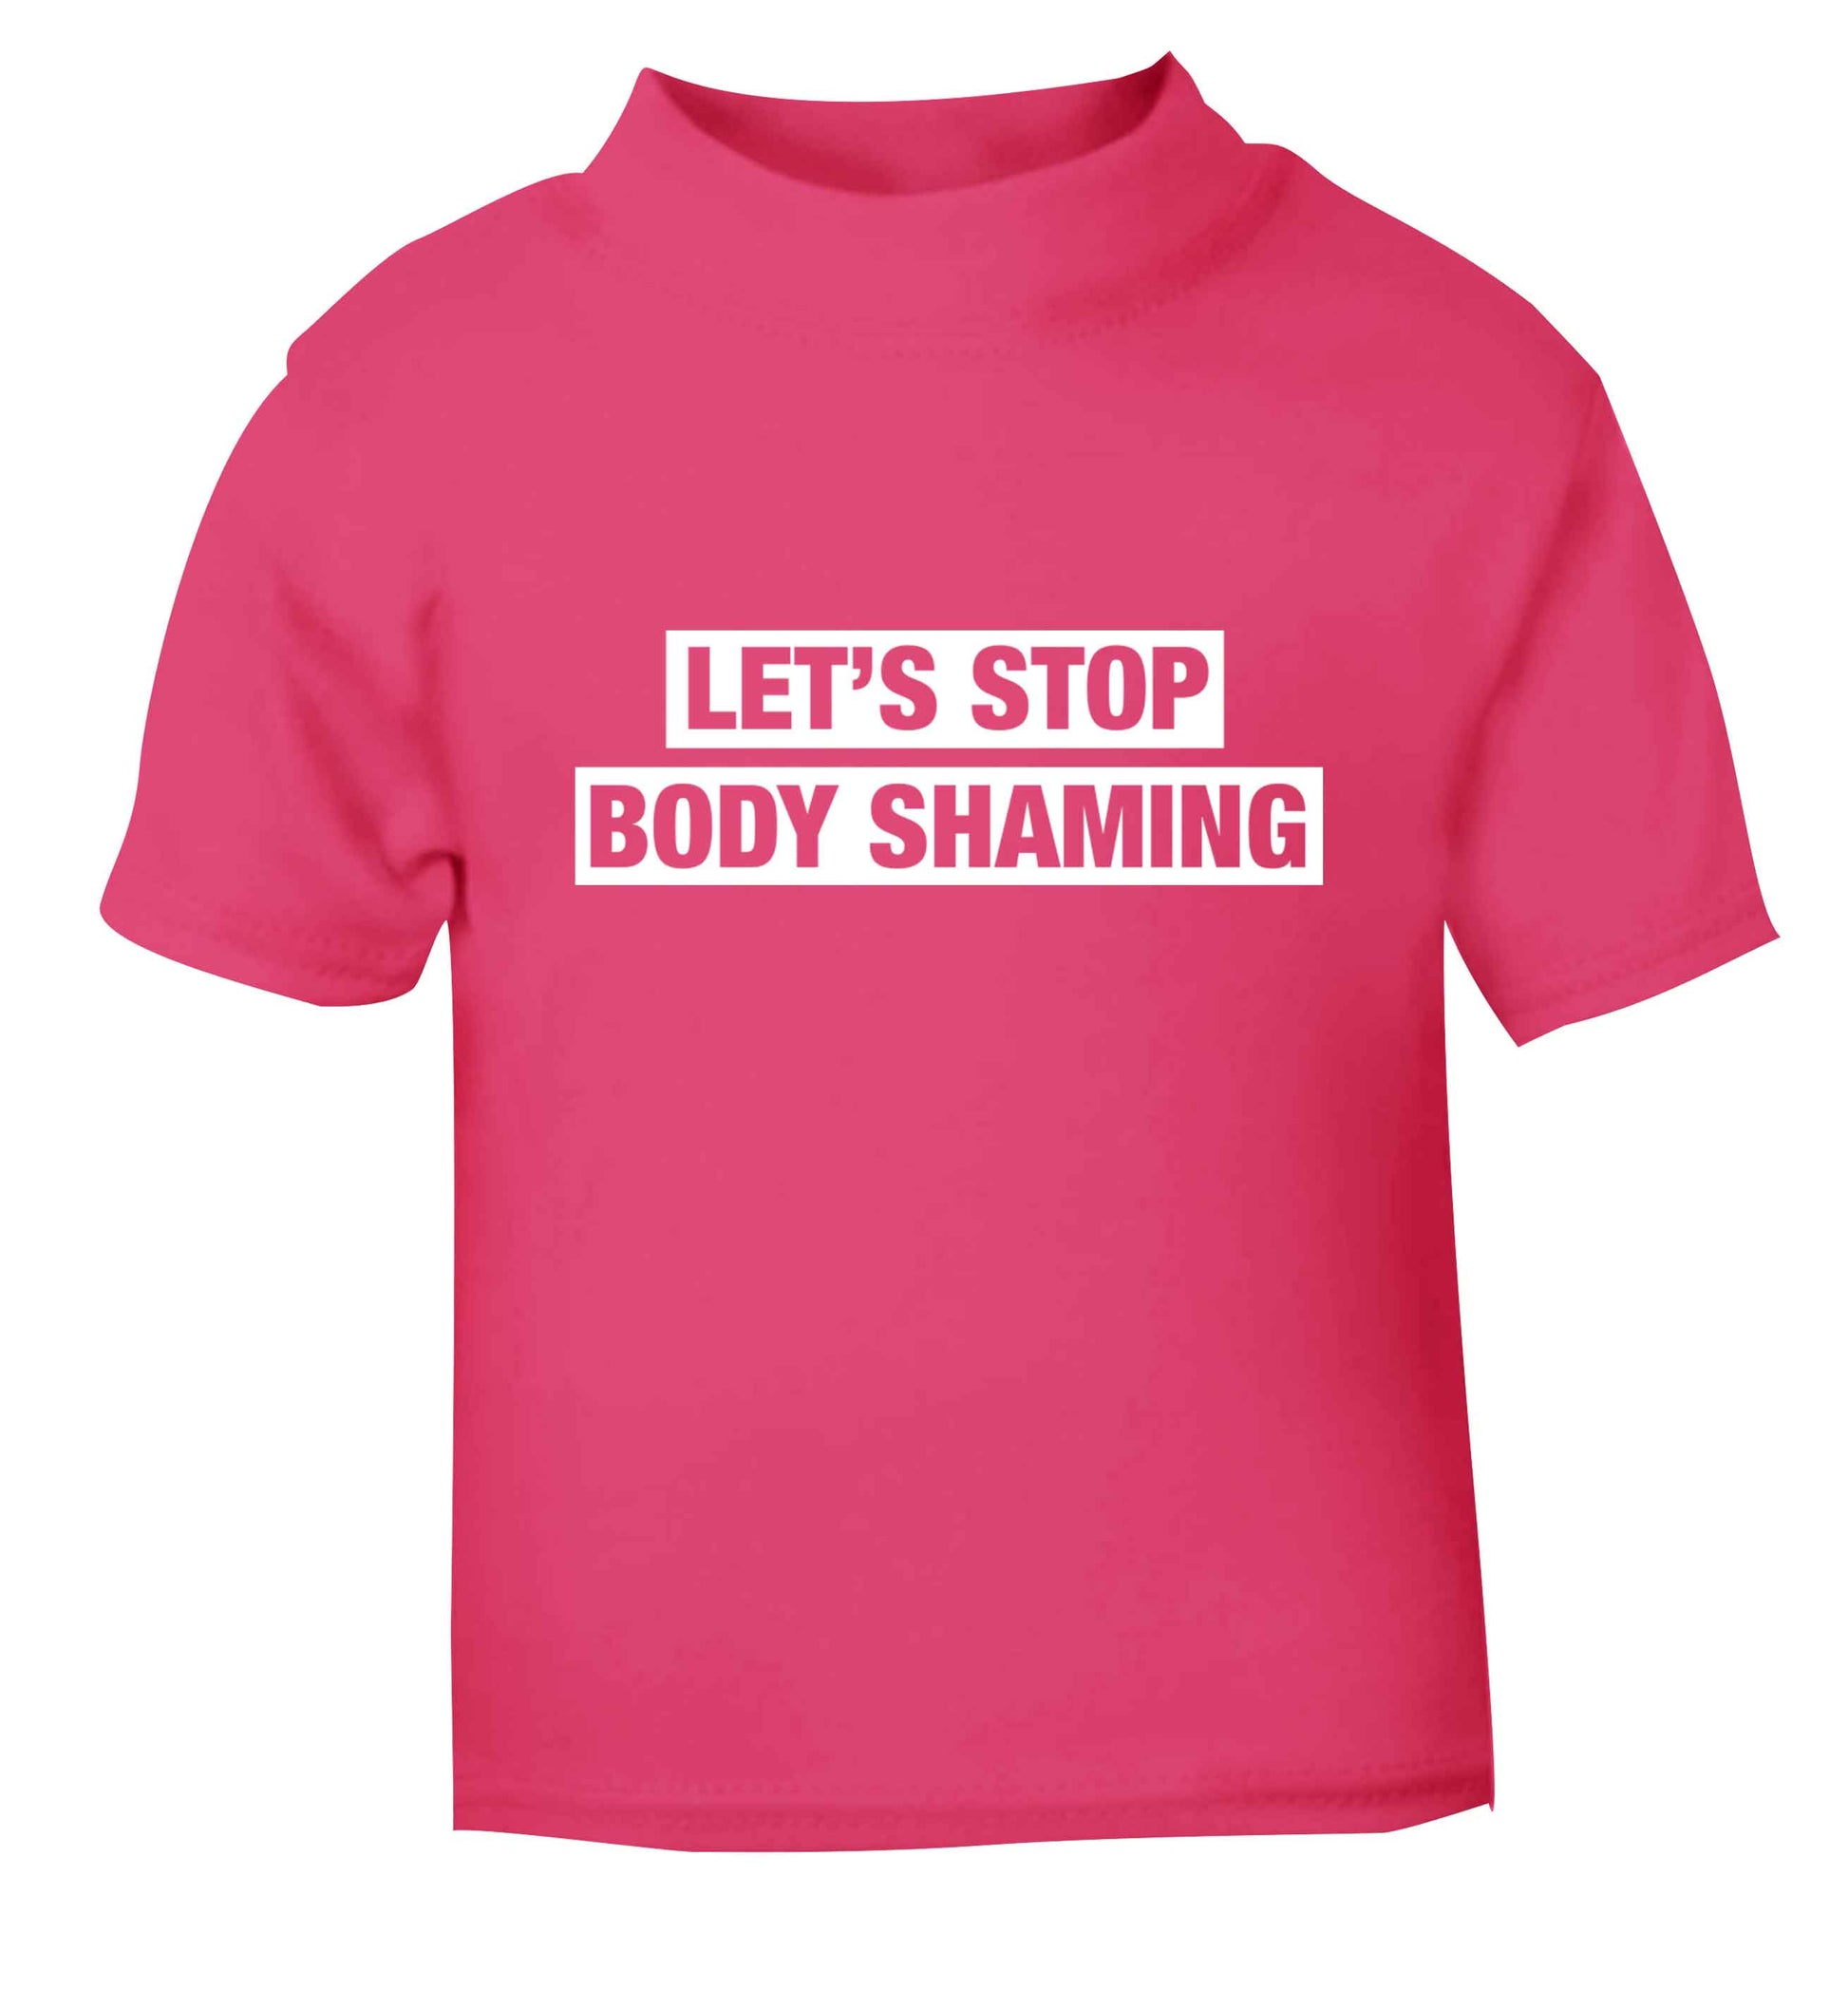 Let's stop body shaming pink baby toddler Tshirt 2 Years